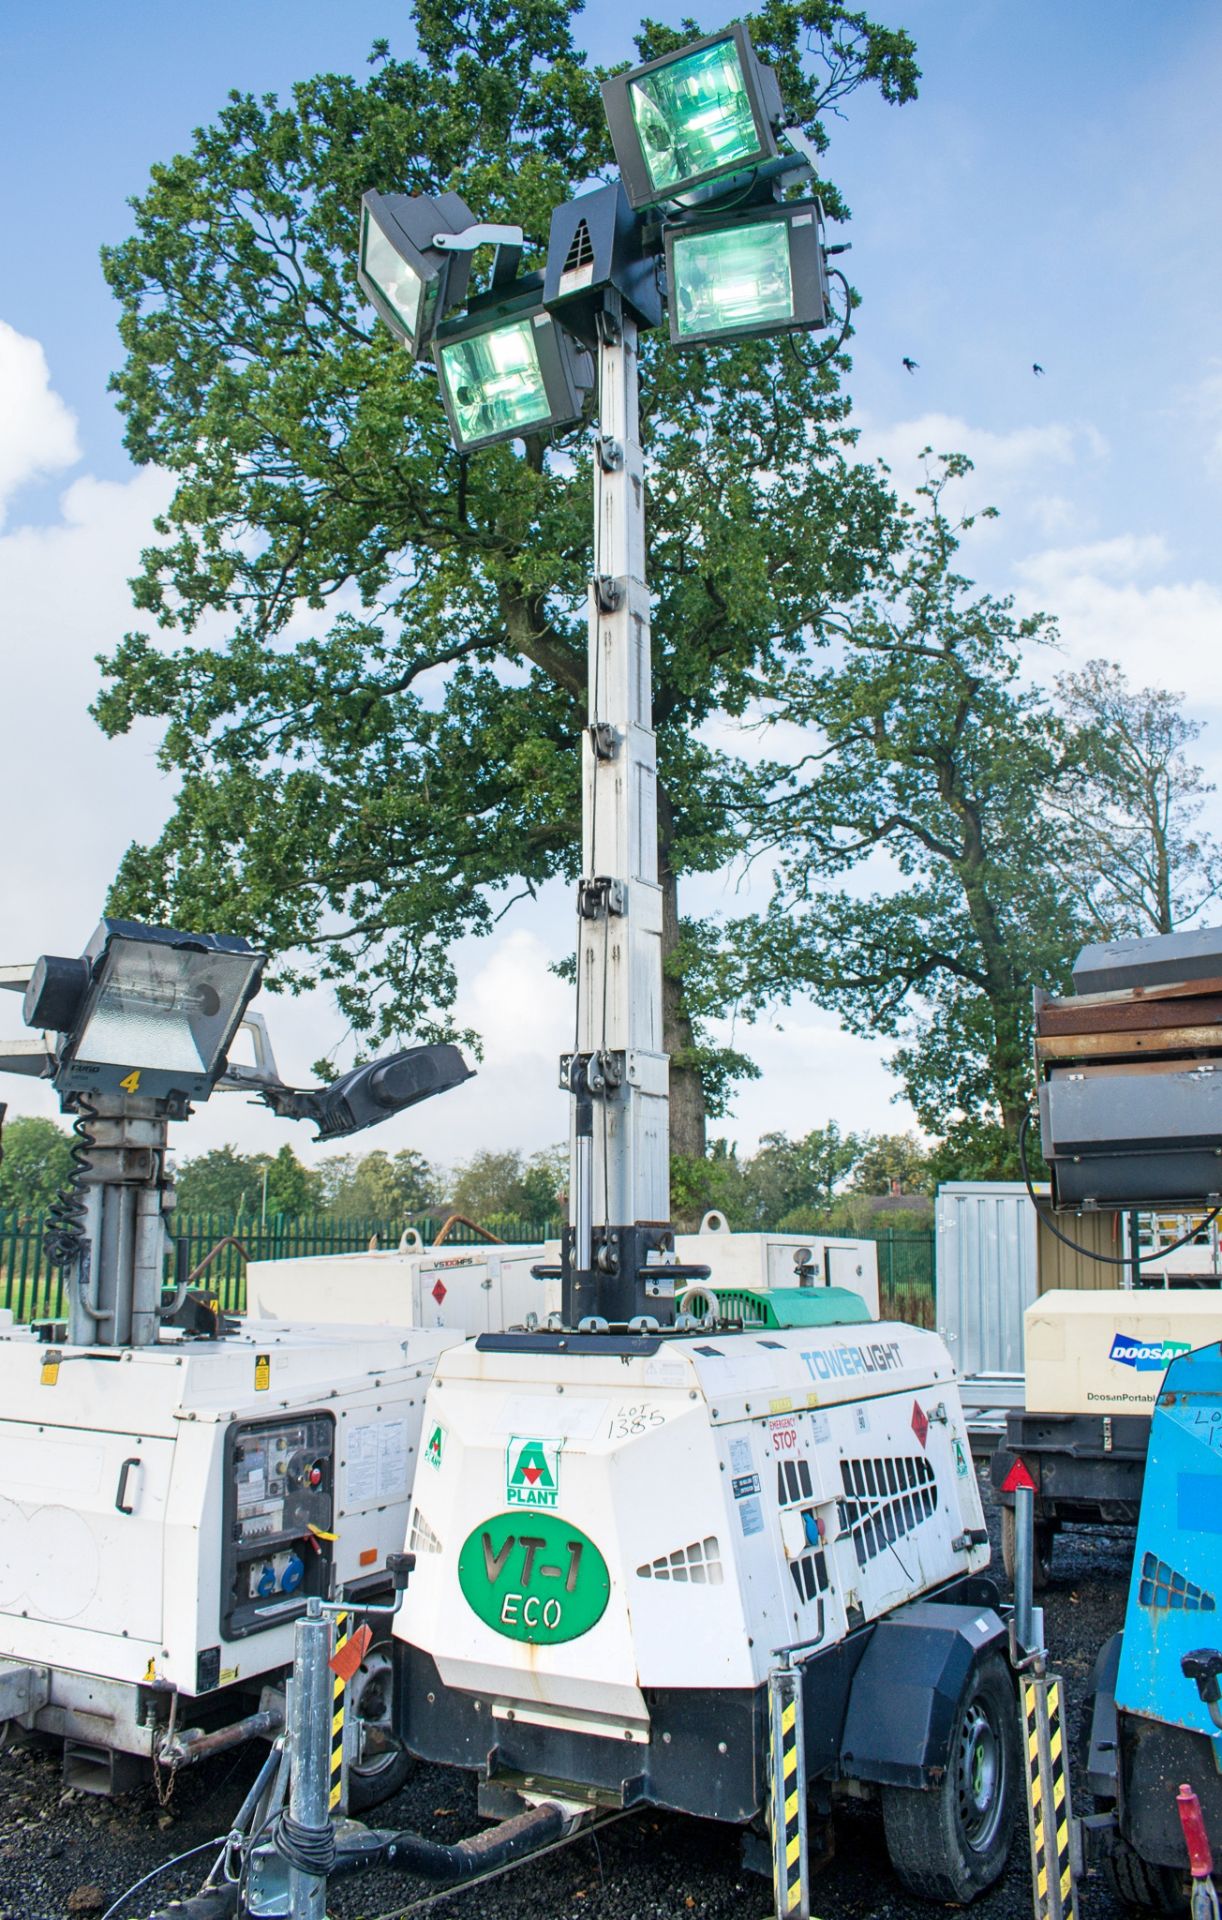 Tower Light VT-1 diesel driven mobile lighting tower Year: 2012 S/N: 1203182 Recorded Hours: 1951 - Image 5 of 8